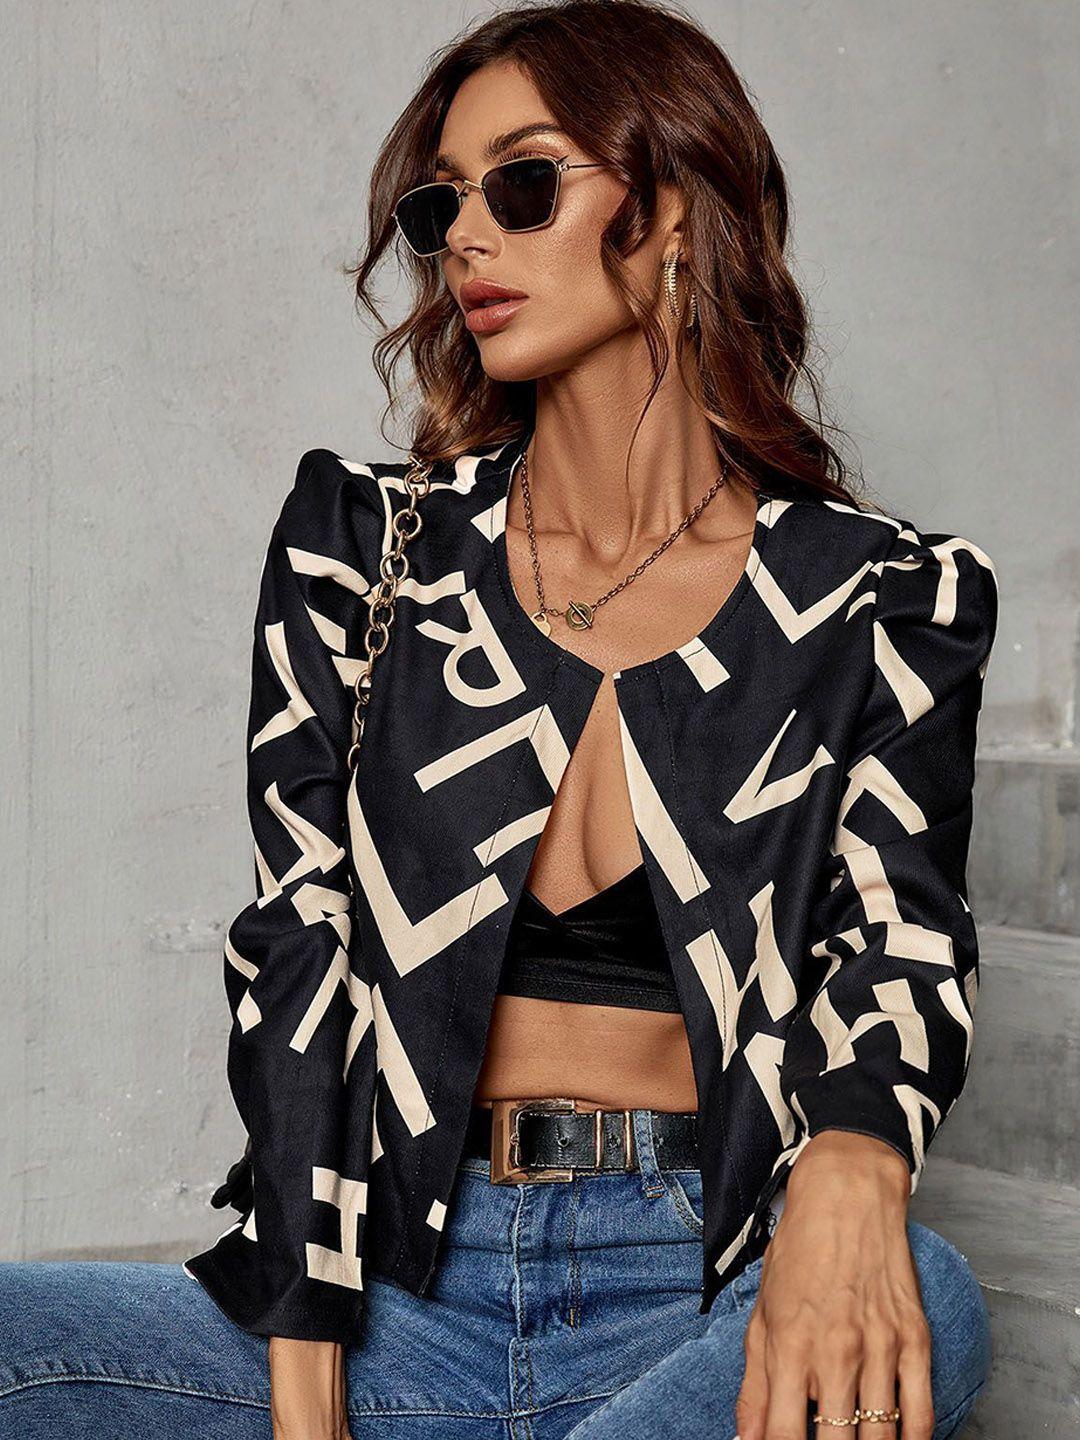 stylecast black typography printed crop tailored jacket